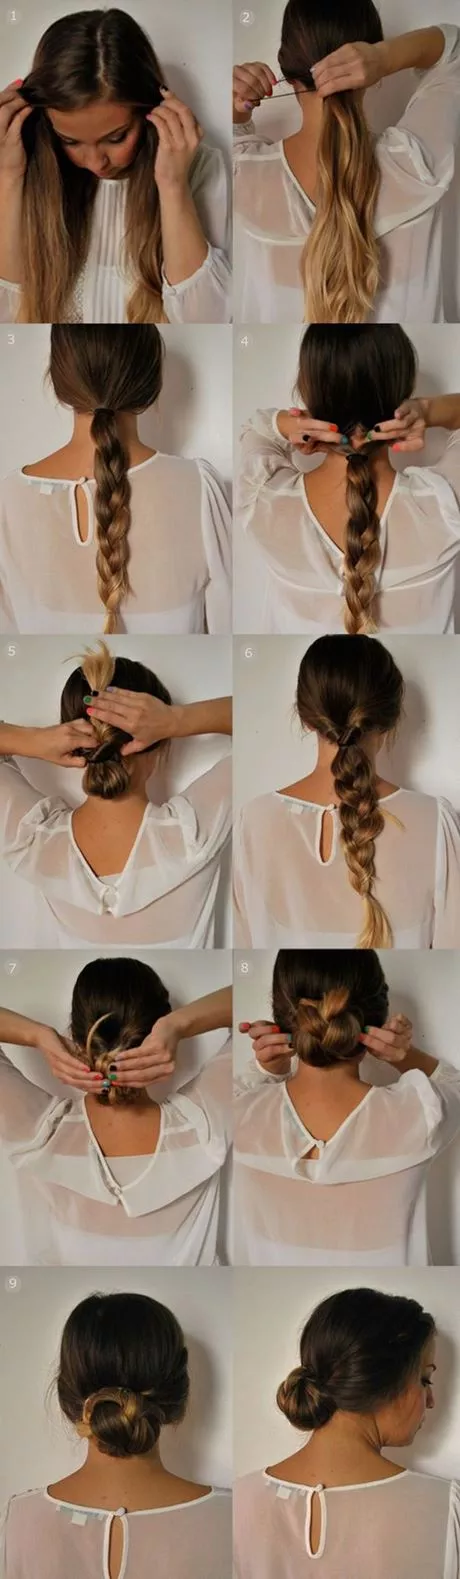 Really cute and easy hairstyles really-cute-and-easy-hairstyles-83_4-12-12